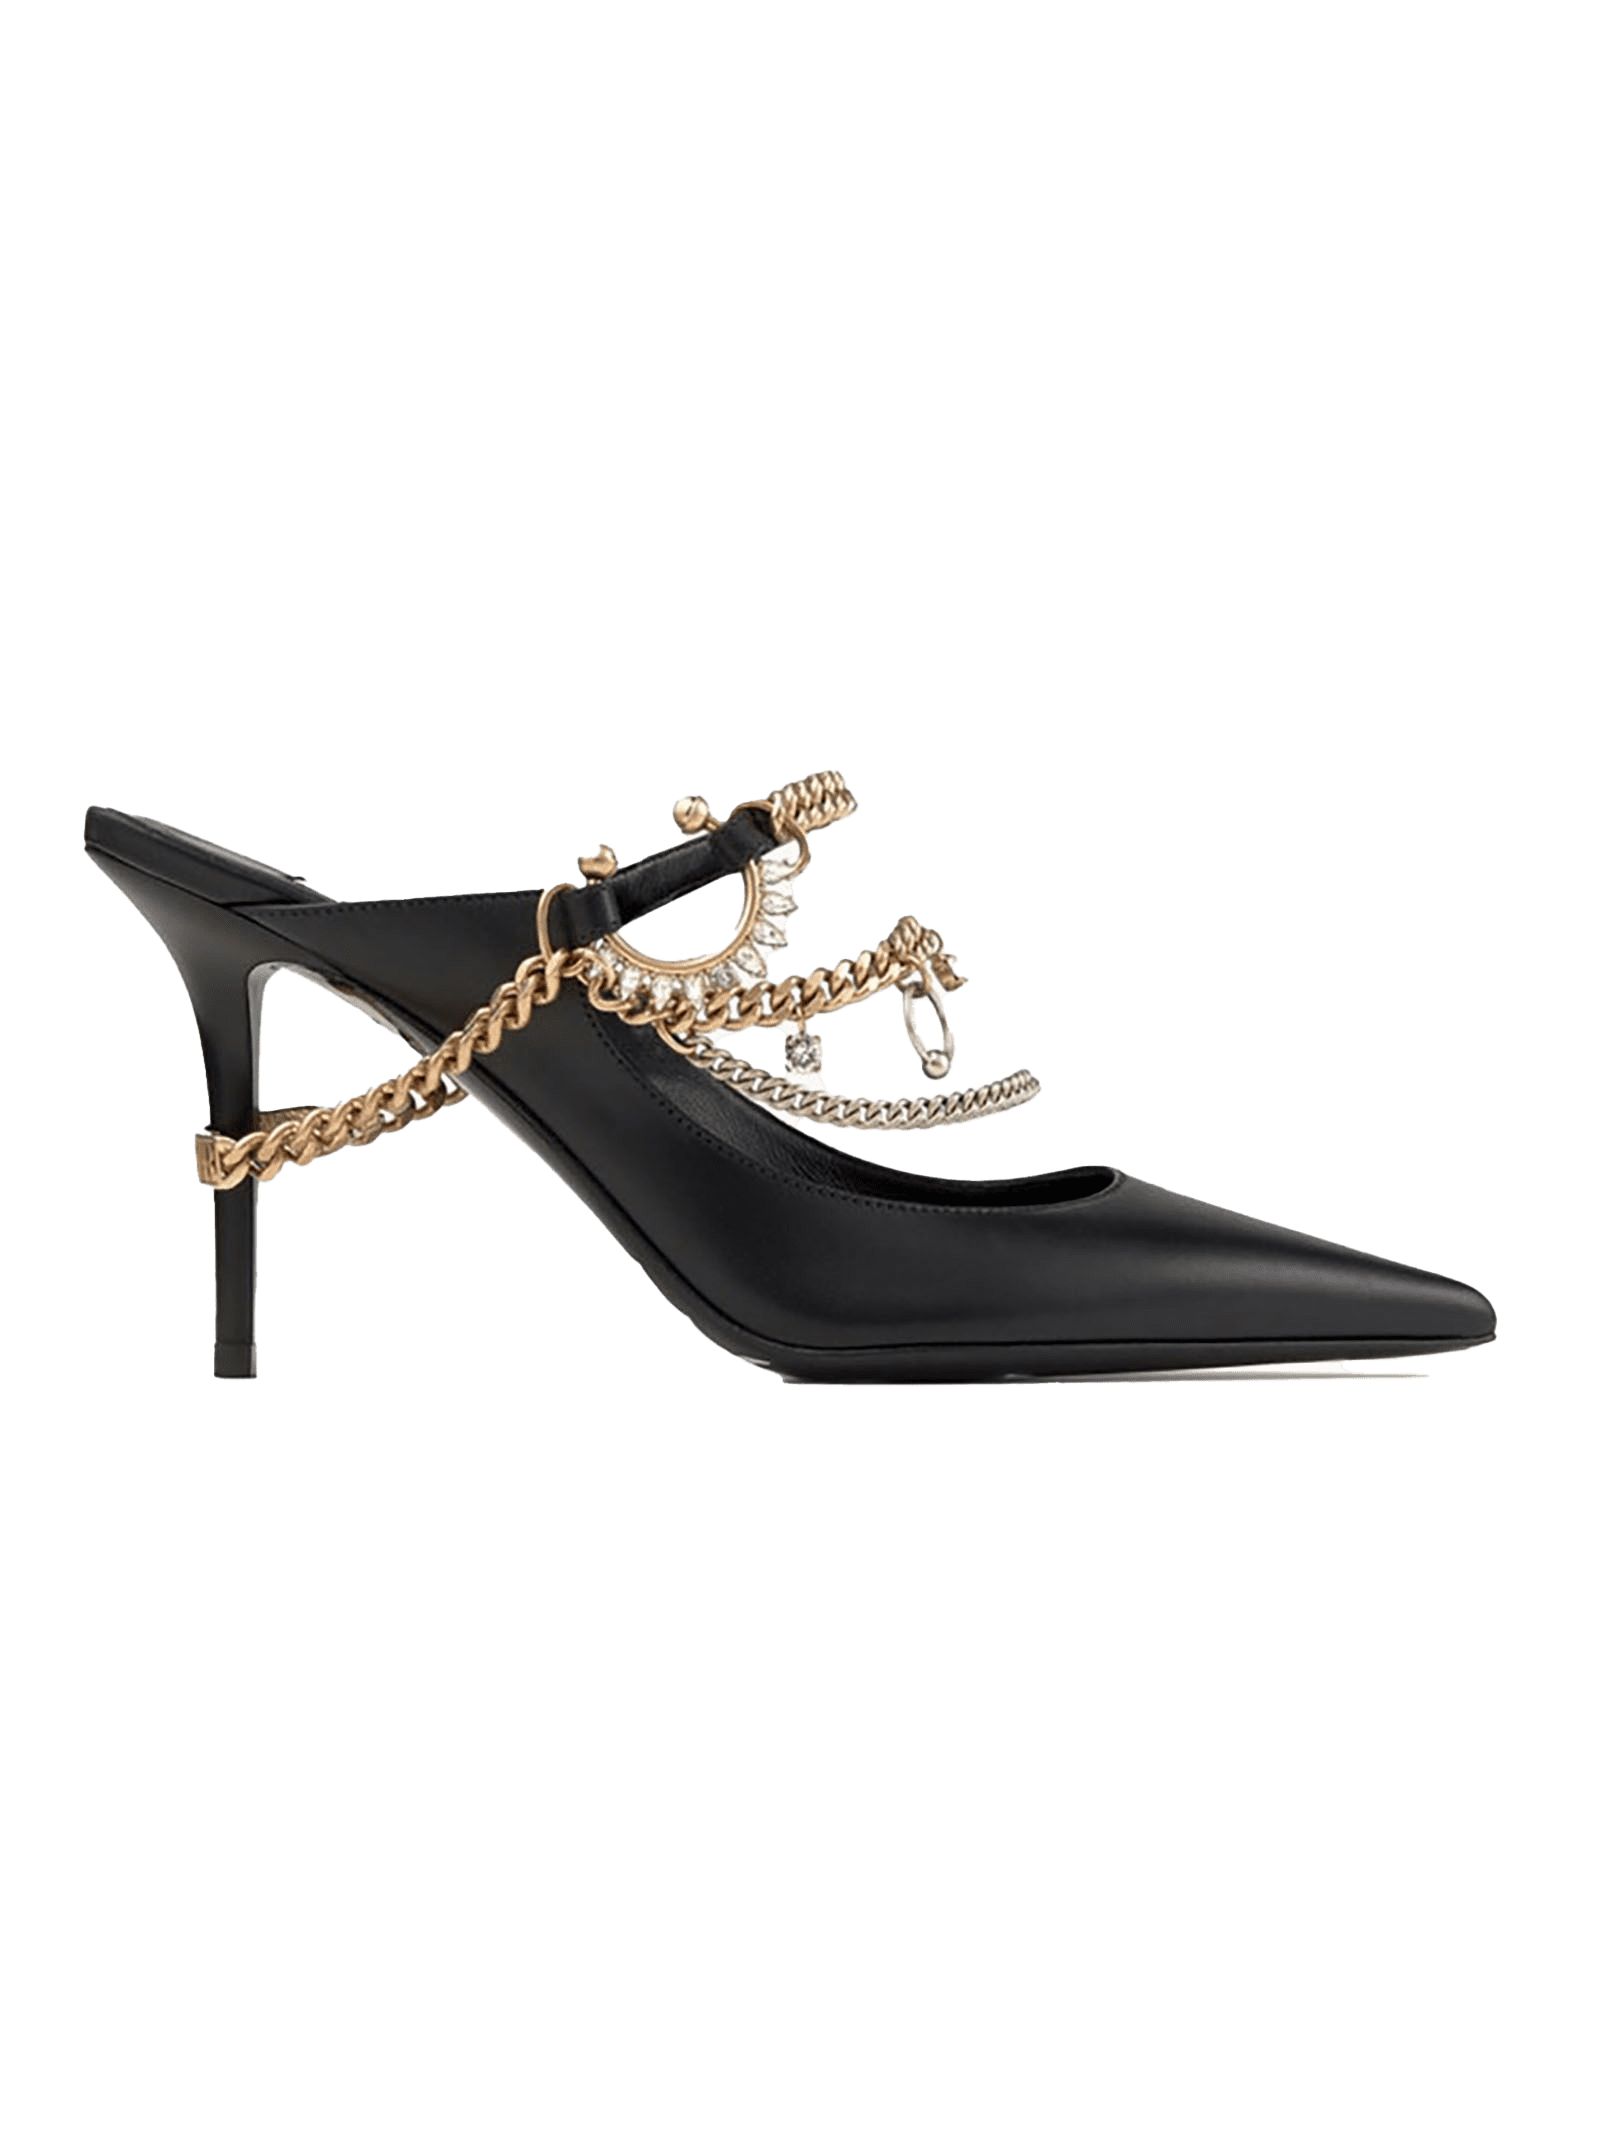 JIMMY CHOO X JEAN PAUL GAULTIER Black Calf Leather Mules With Jewellery